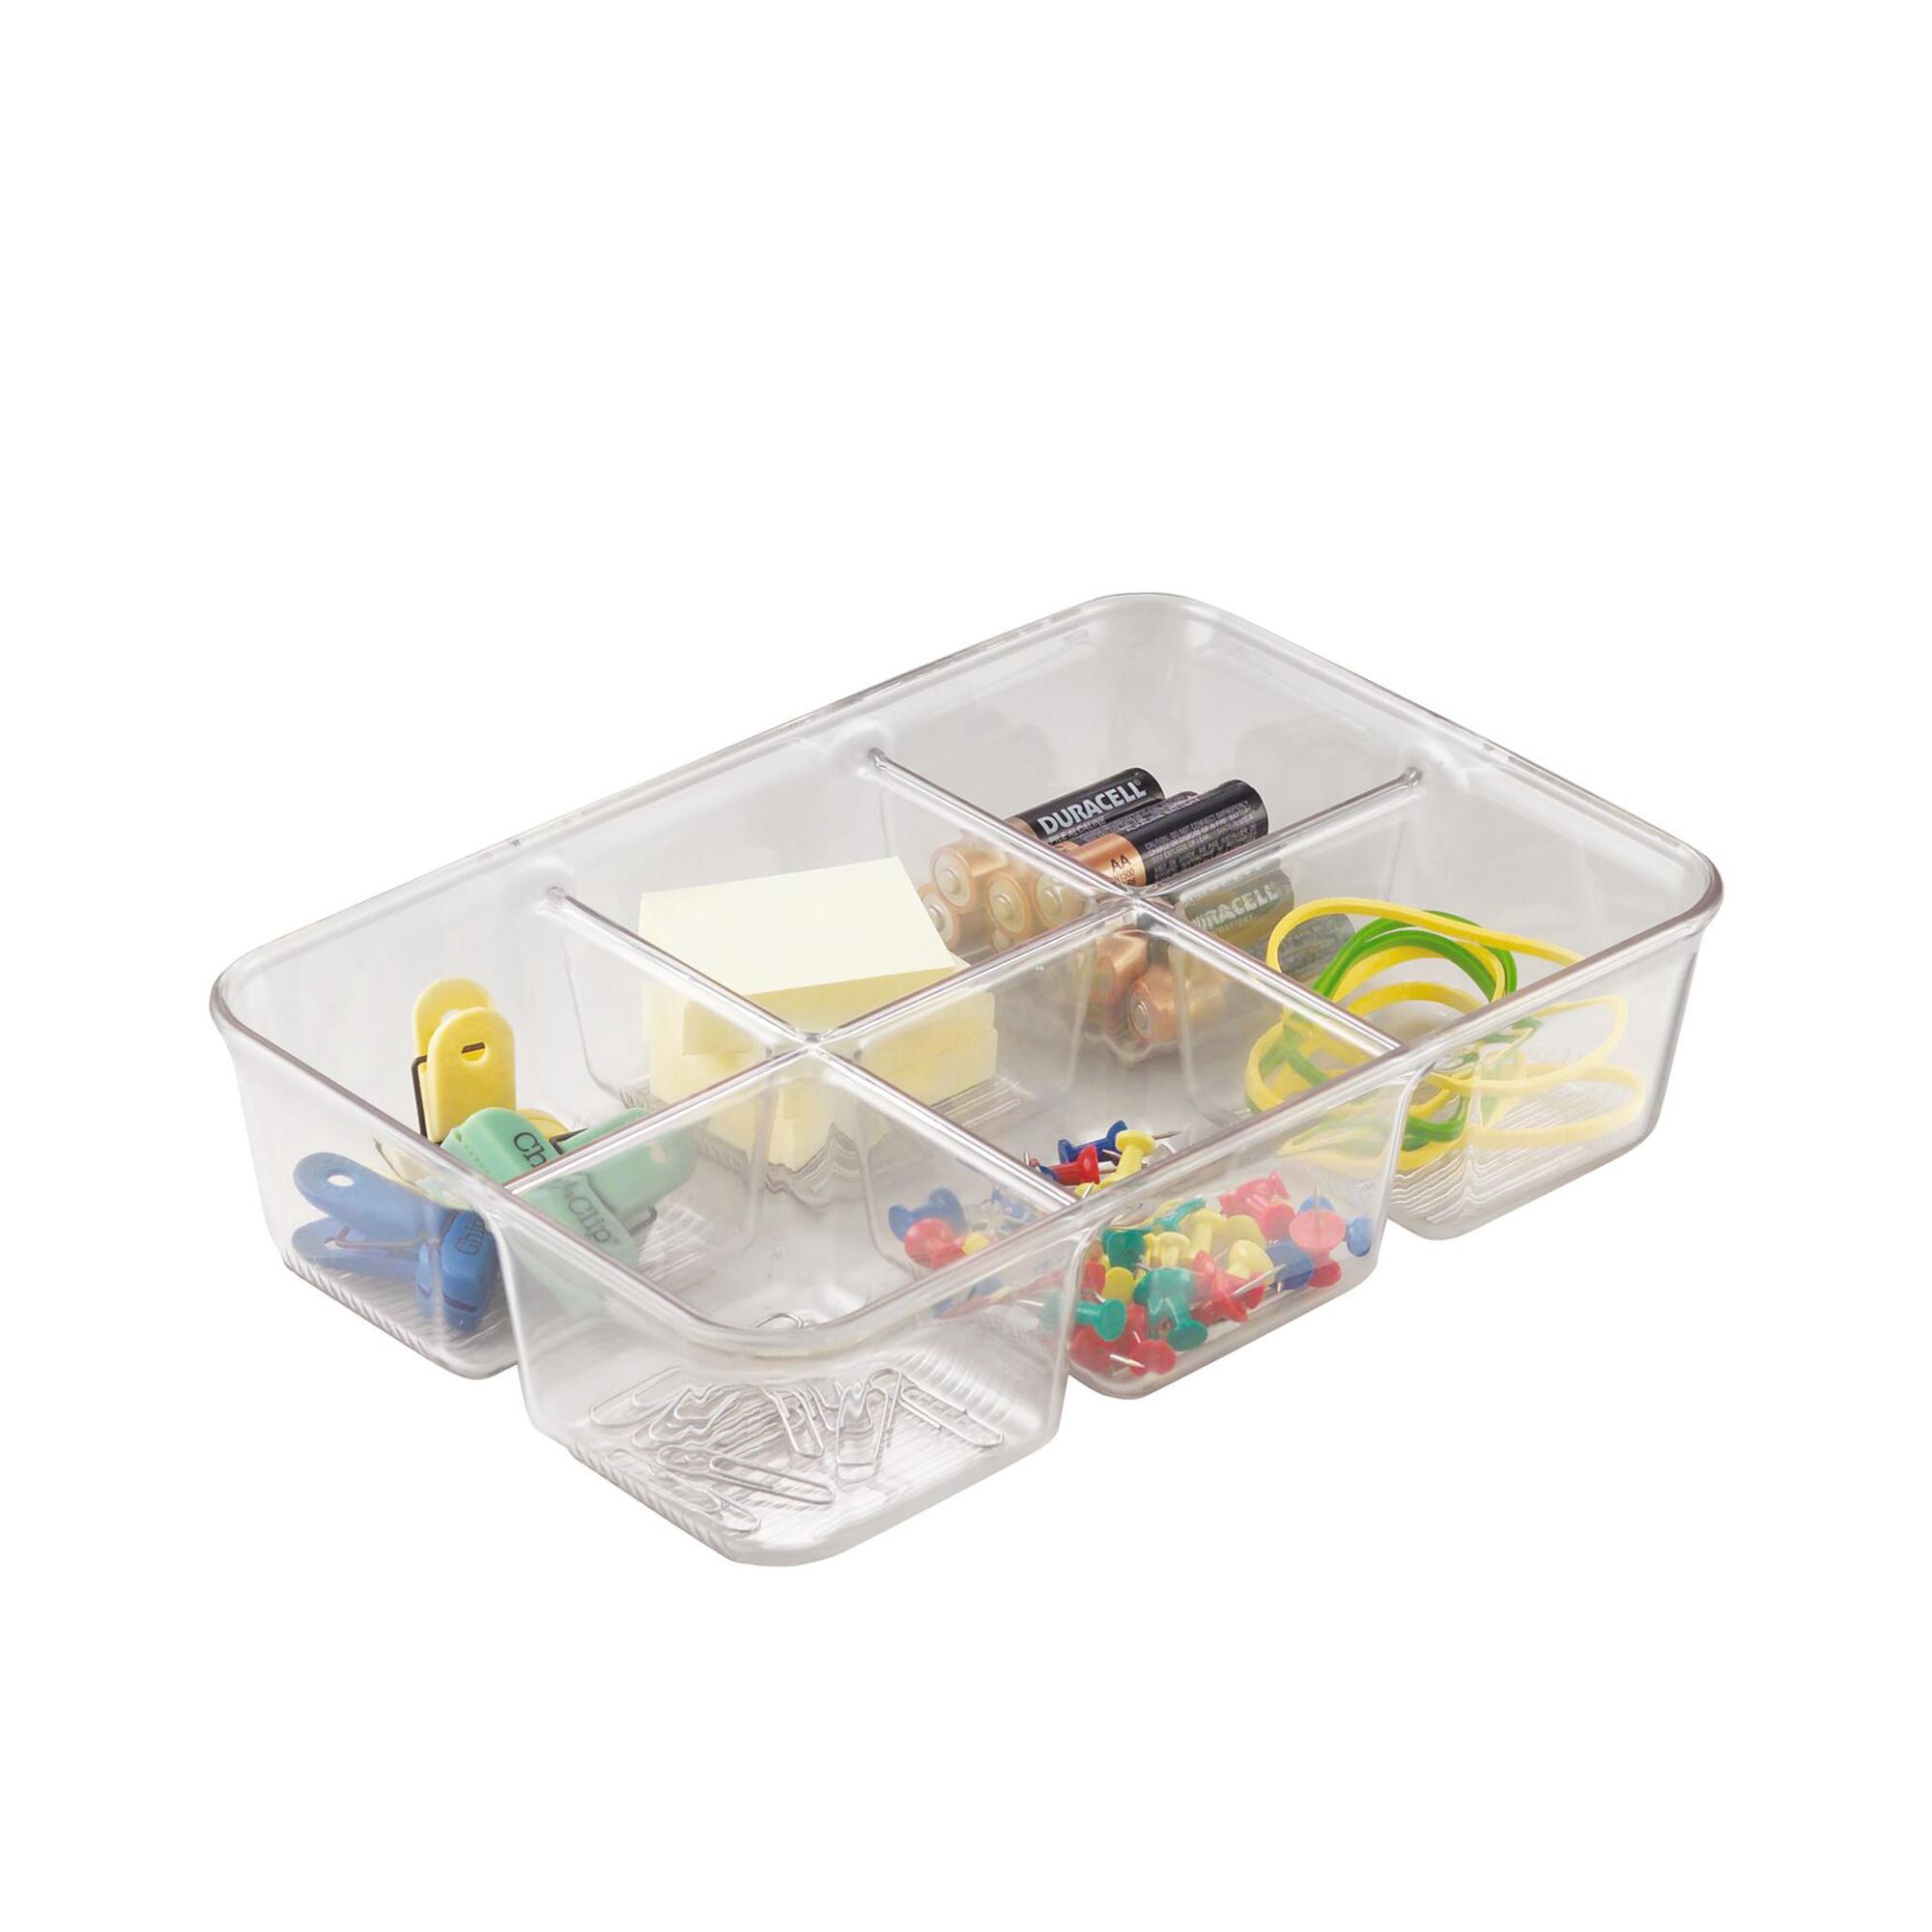 iDesign Linus Pack Organiser 6 Compartment Clear Image 3